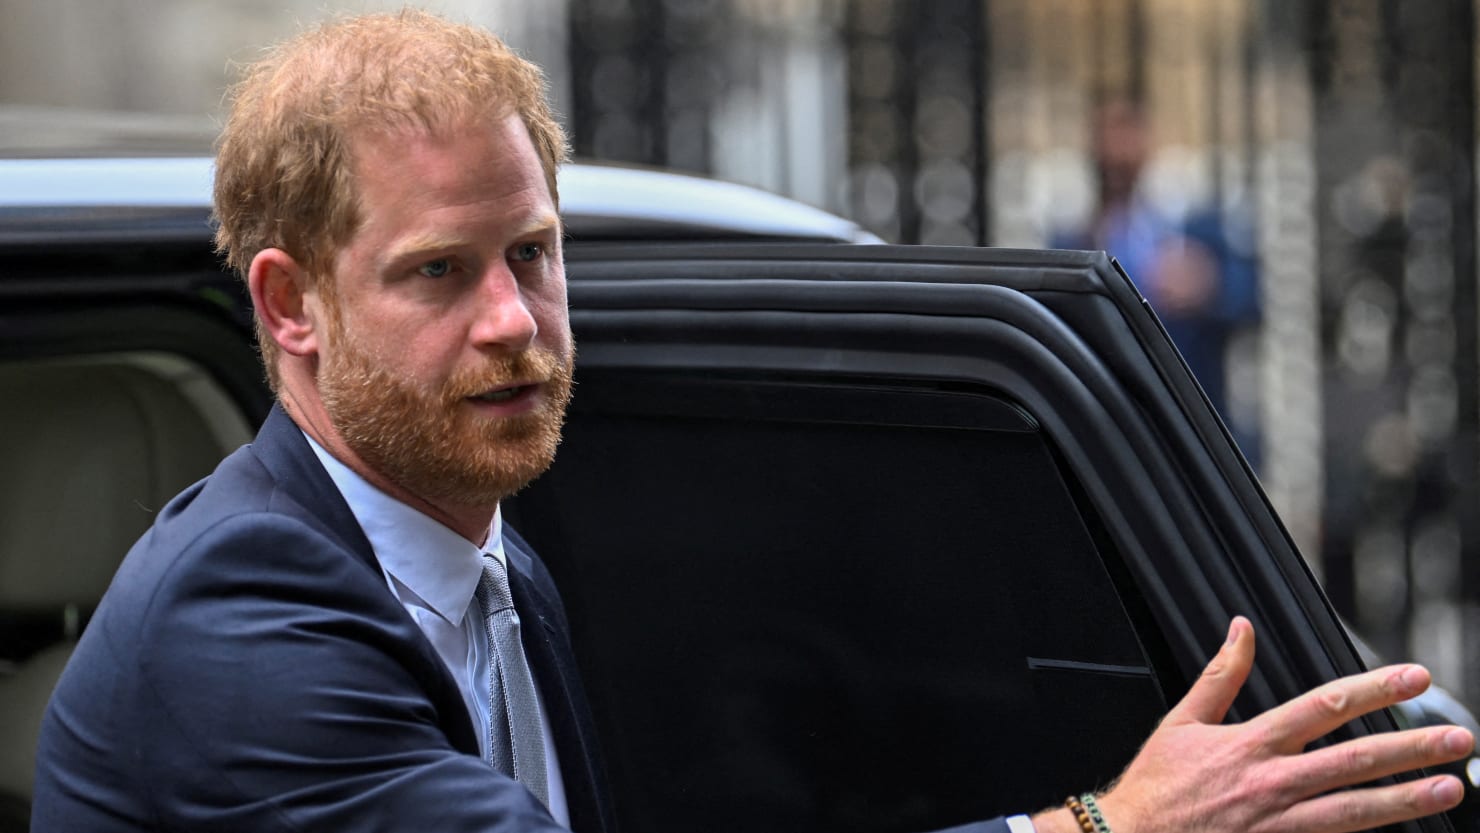 Royal sources say peace talks with Prince Harry will not happen